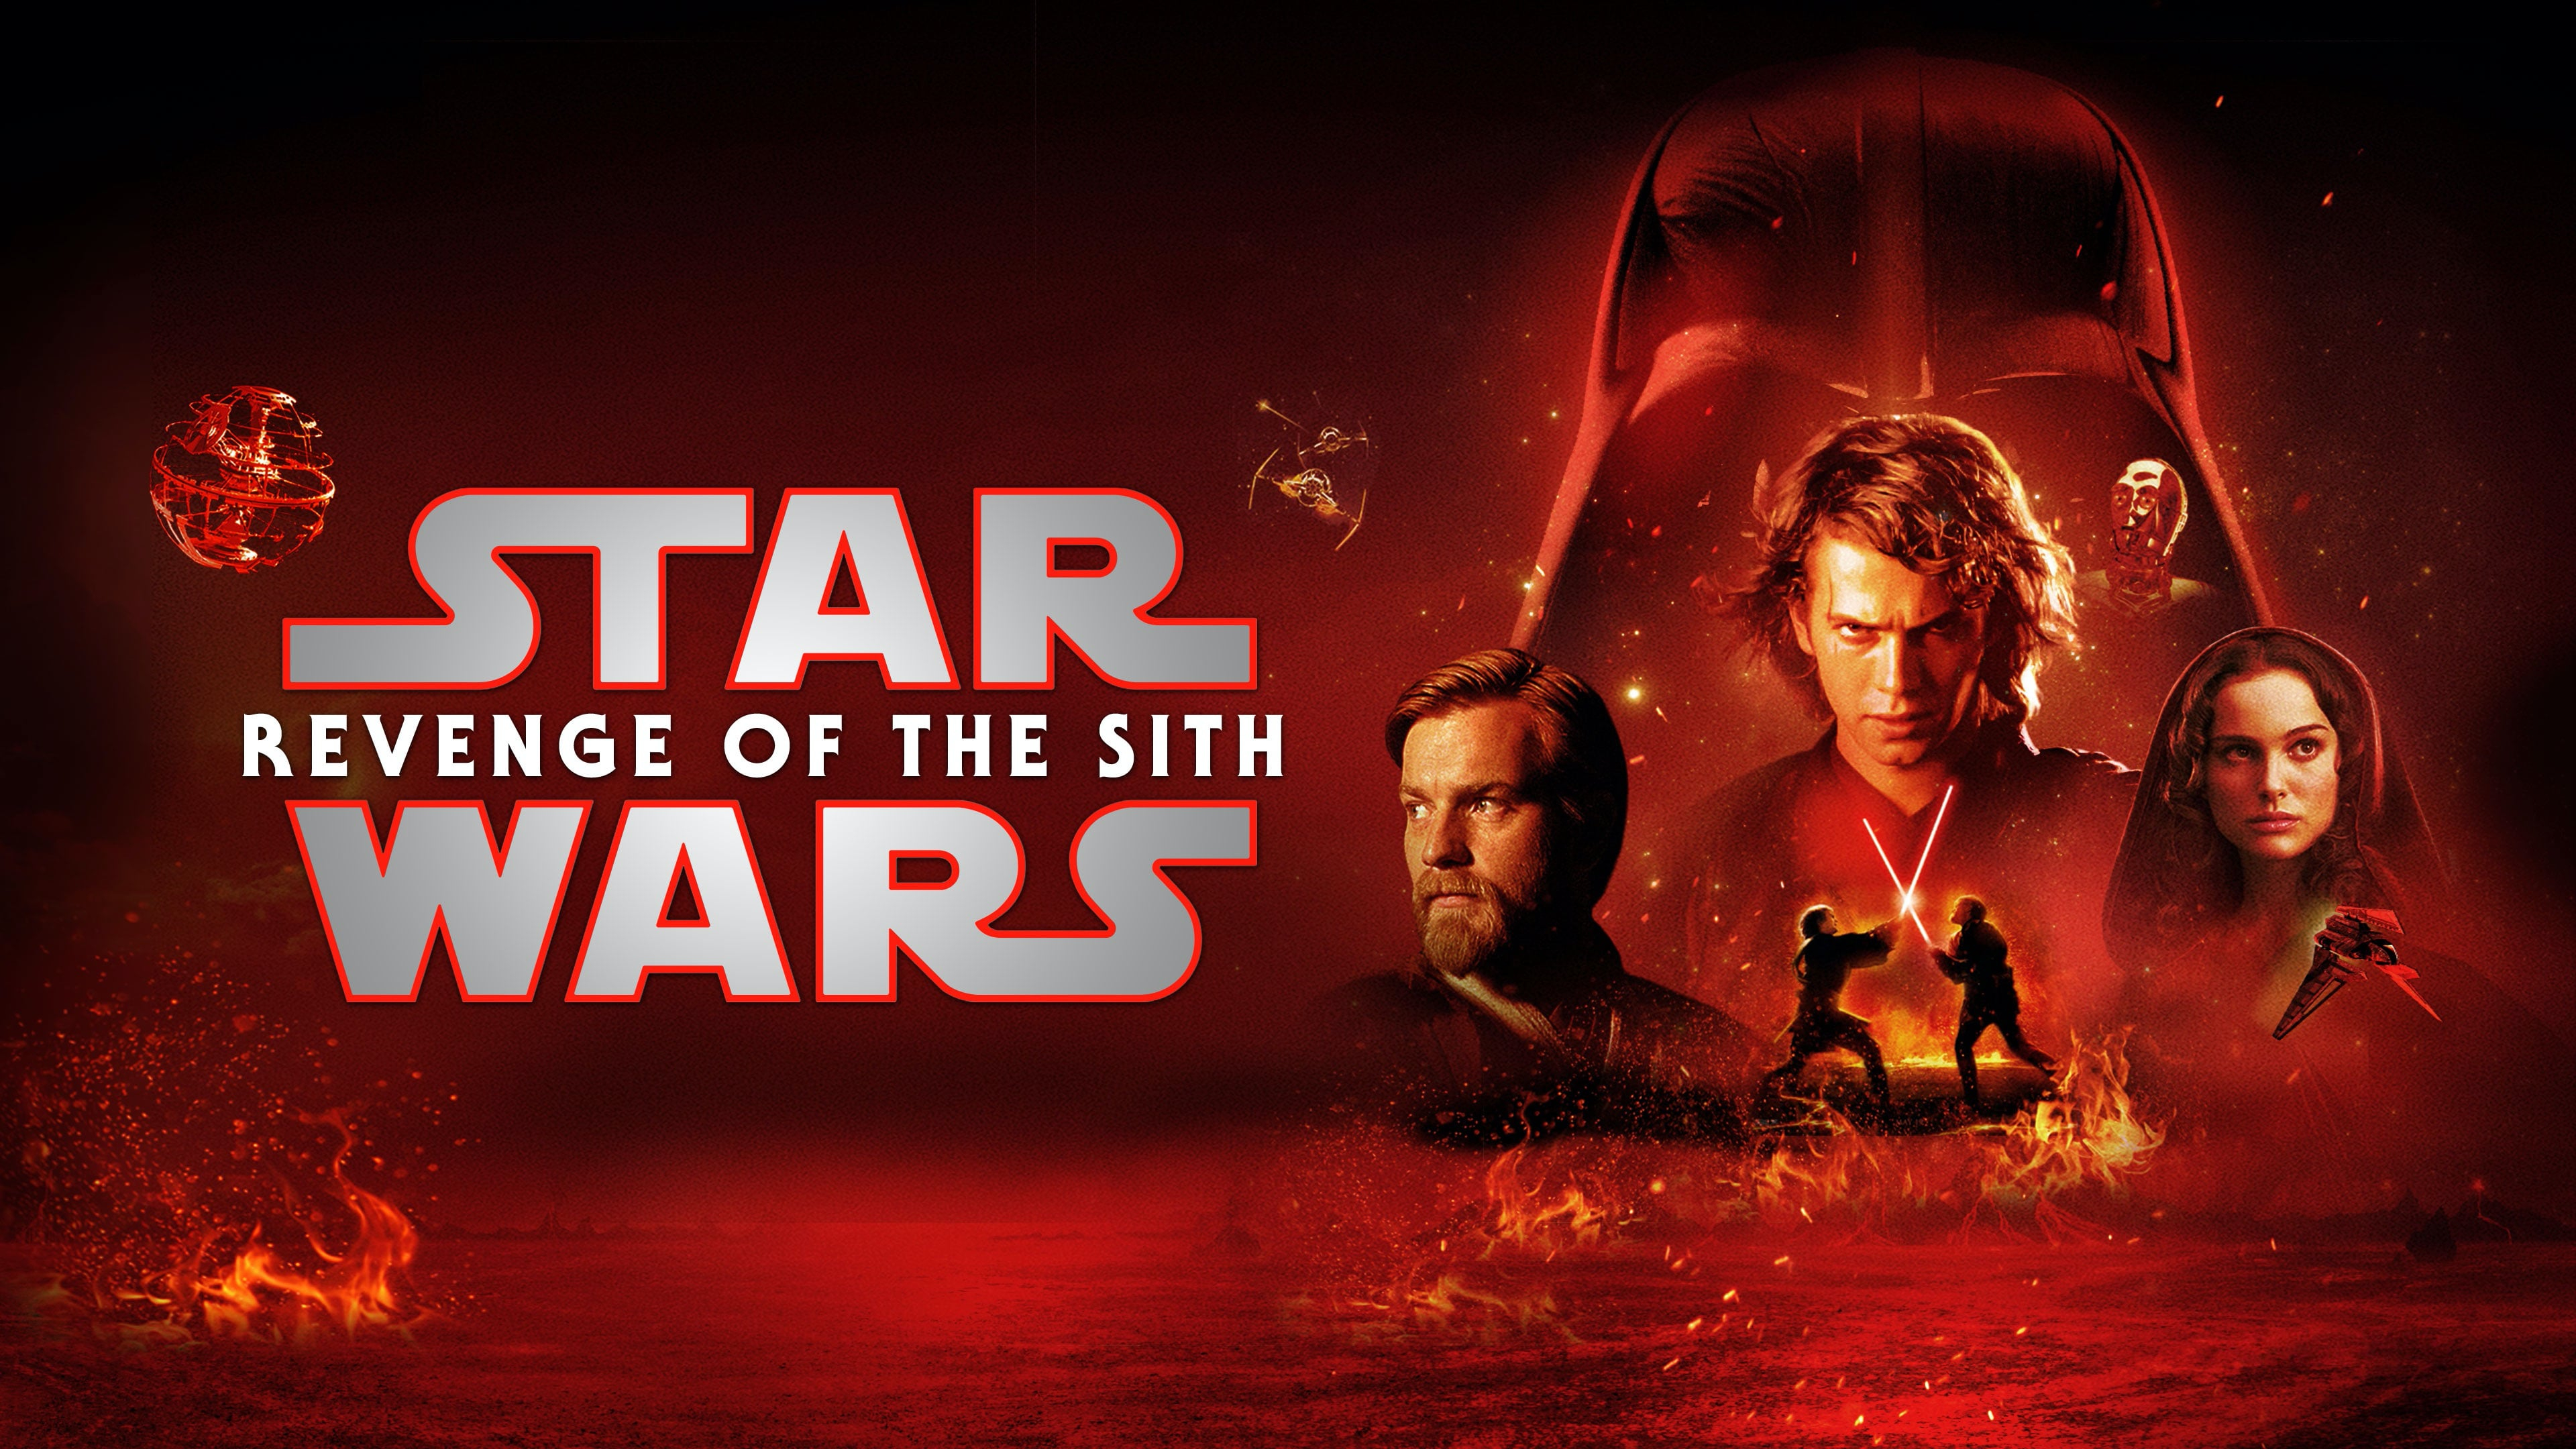 3840x2160 30+ Star Wars Episode III: Revenge of the Sith HD Wallpapers and Backgrounds